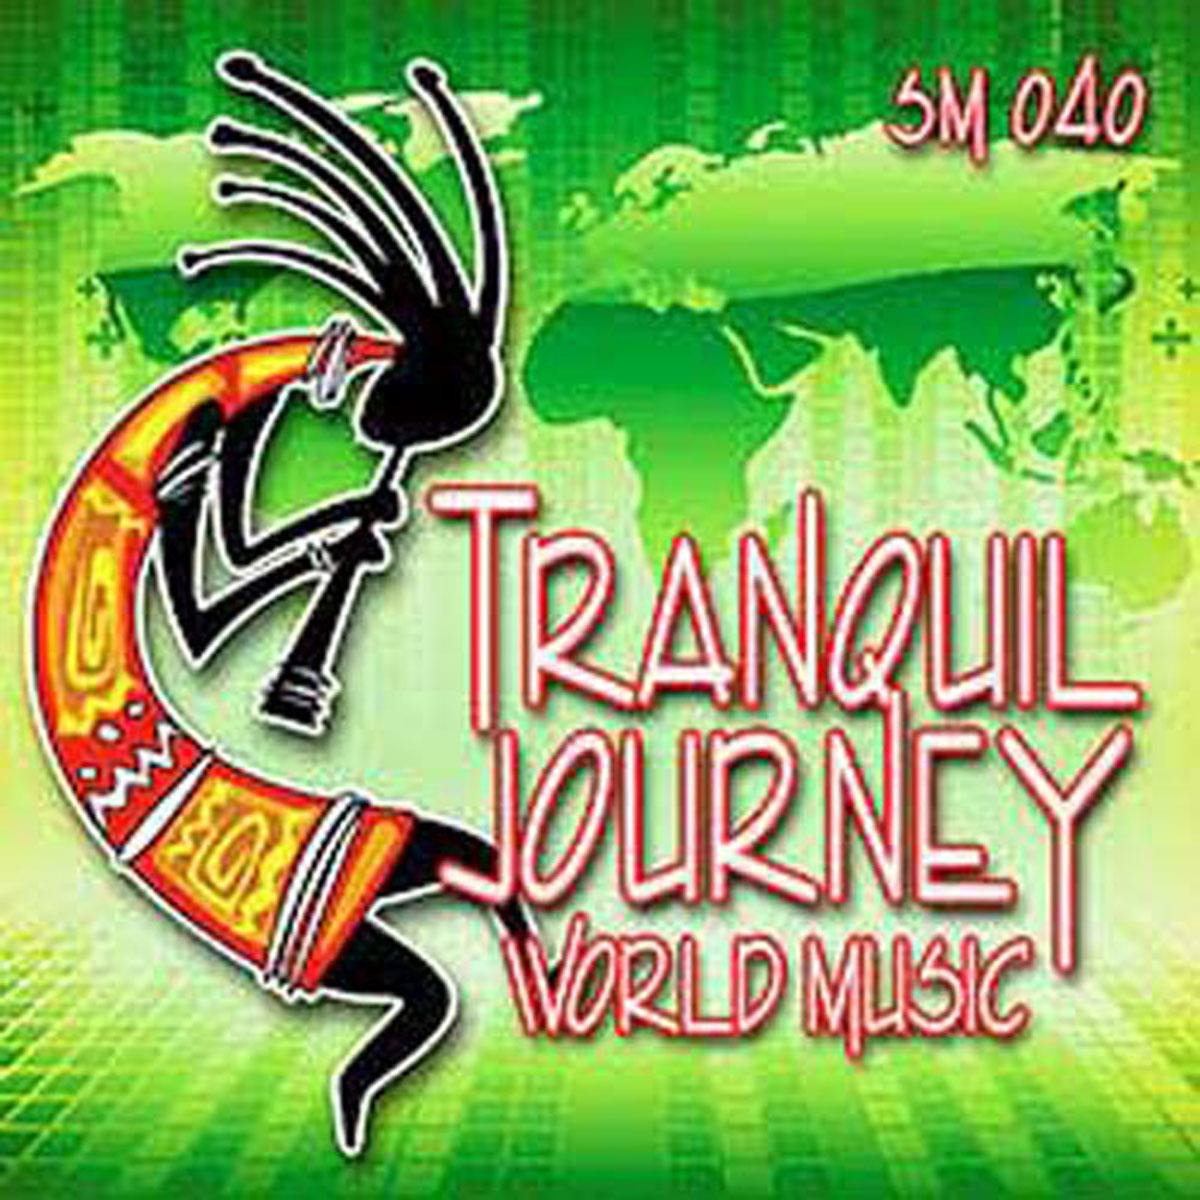 Image of Sound Ideas Tranquil Journey World Music Software